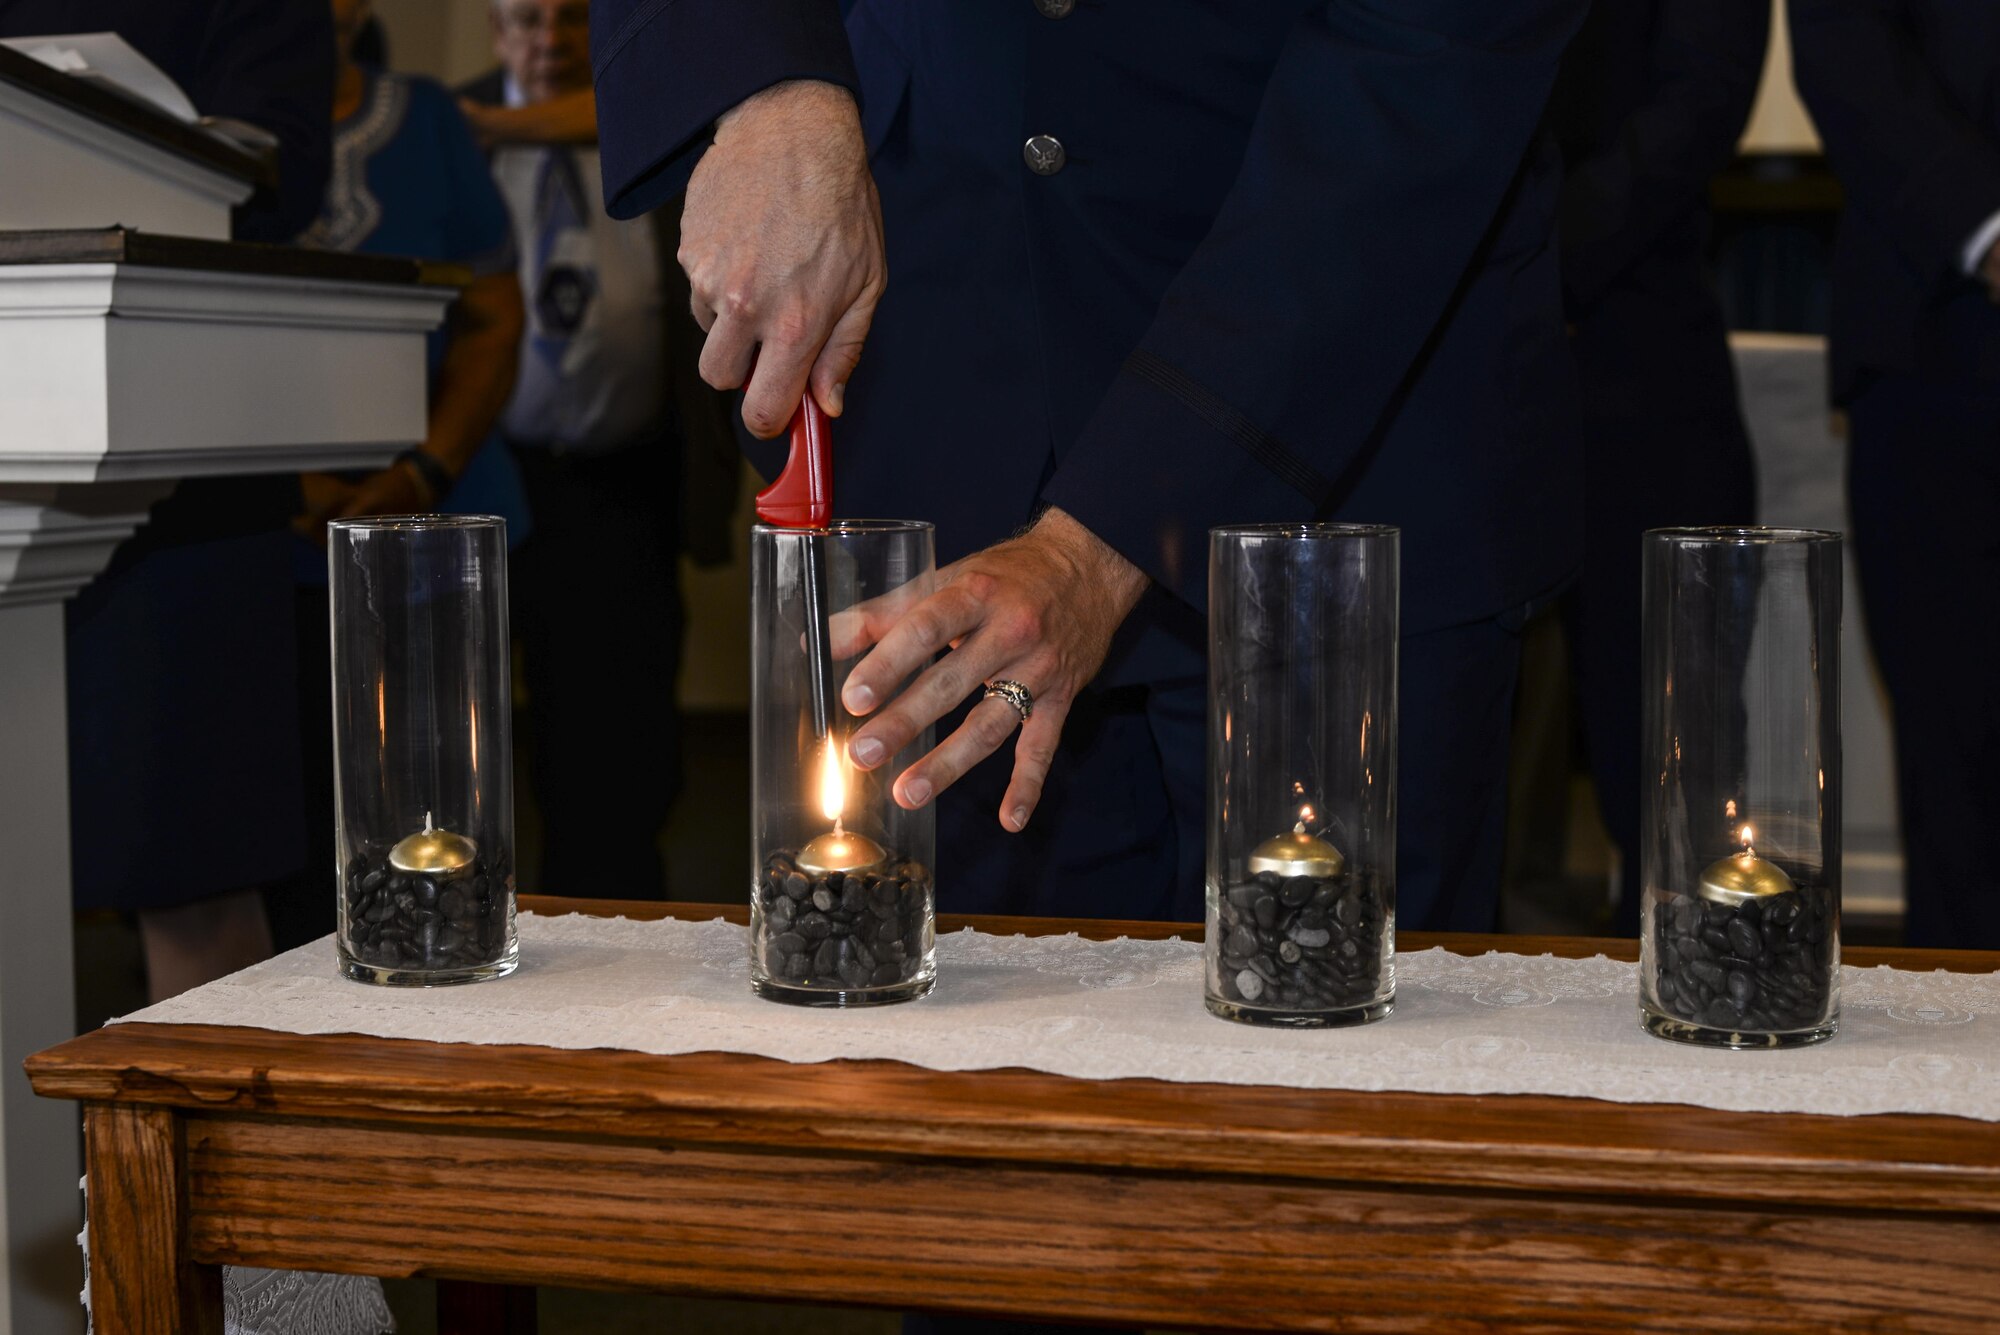 U.S. Air Force Col. Scott Campbell, 355th Fighter Wing commander, lights a candle during a Holocaust remembrance ceremony at Davis-Monthan Air Force Base, Ariz., April 24, 2017. The ceremony was held to honor the 6 million Jews and millions of others that lost their lives during the Holocaust. (U.S. Air Force photo by Airman 1st Class Giovanni Sims)